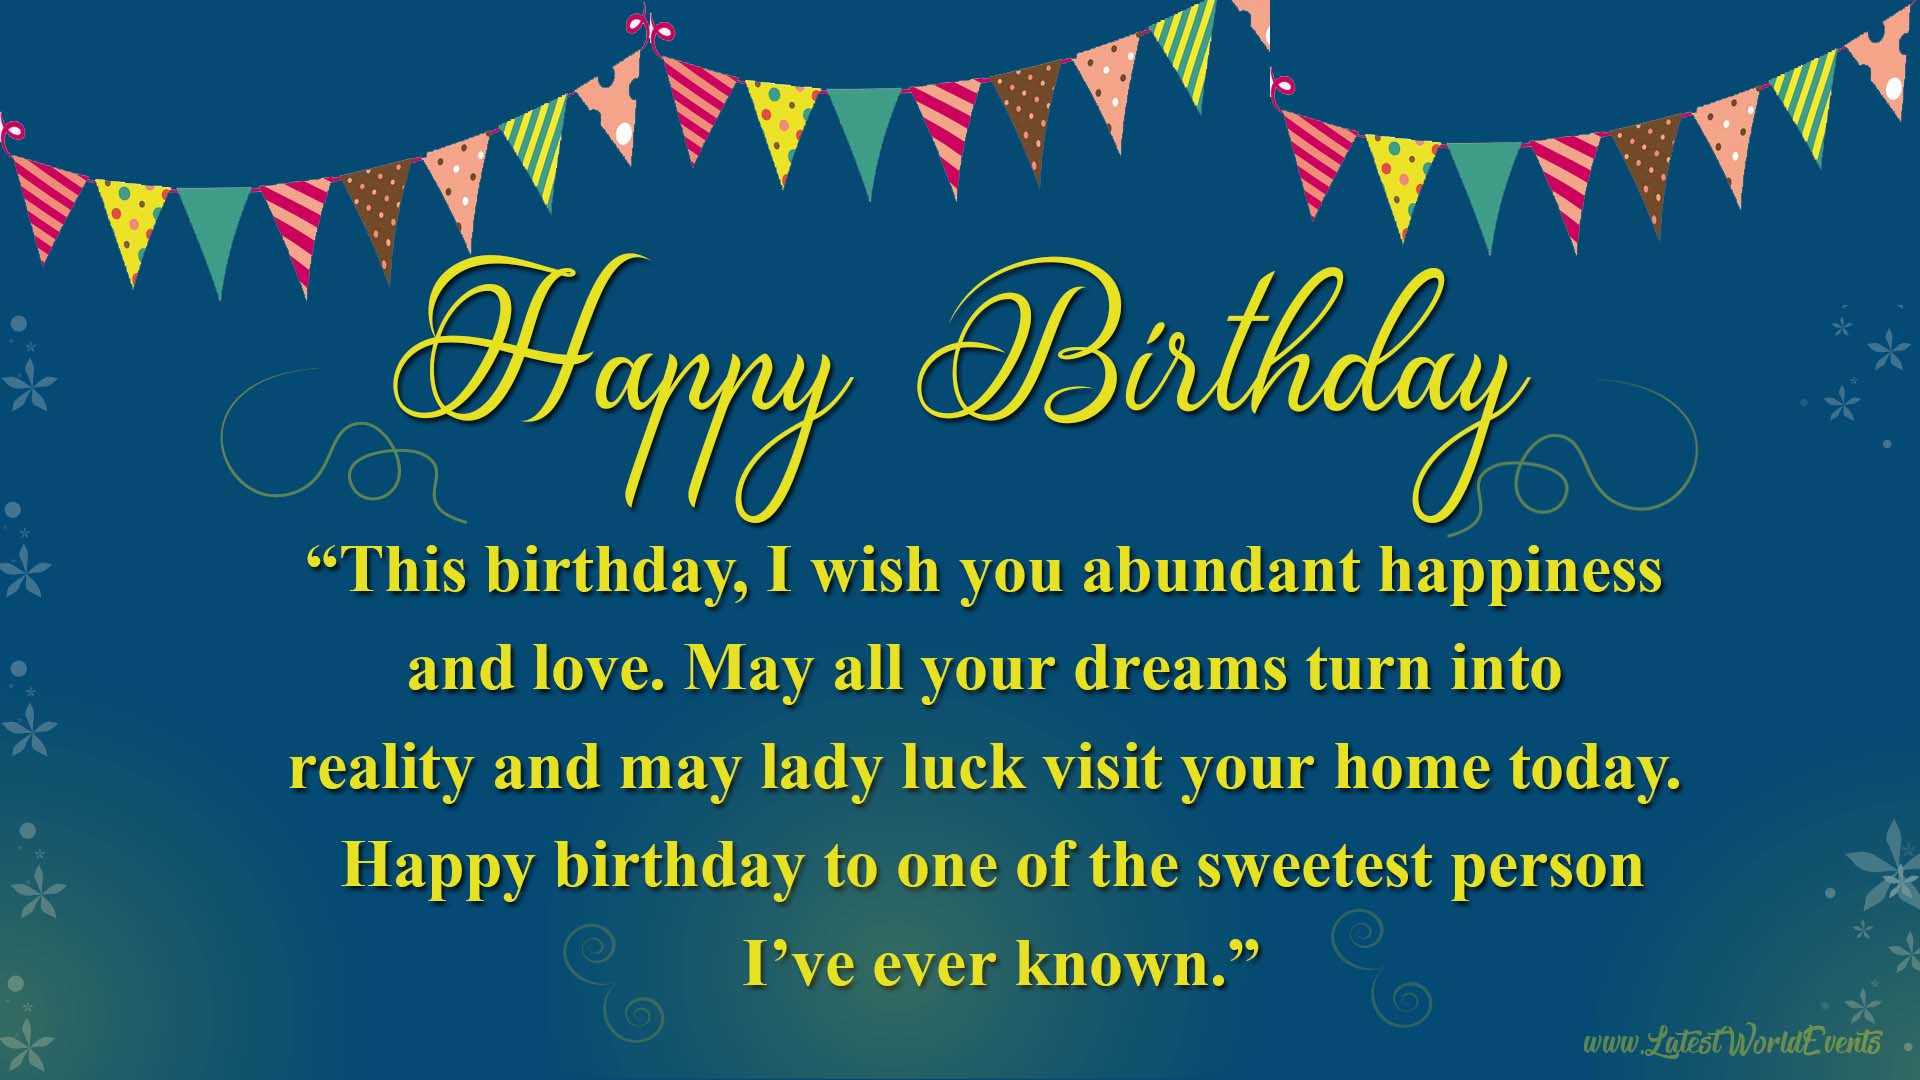 Birthday Messages Wishes for Everyone